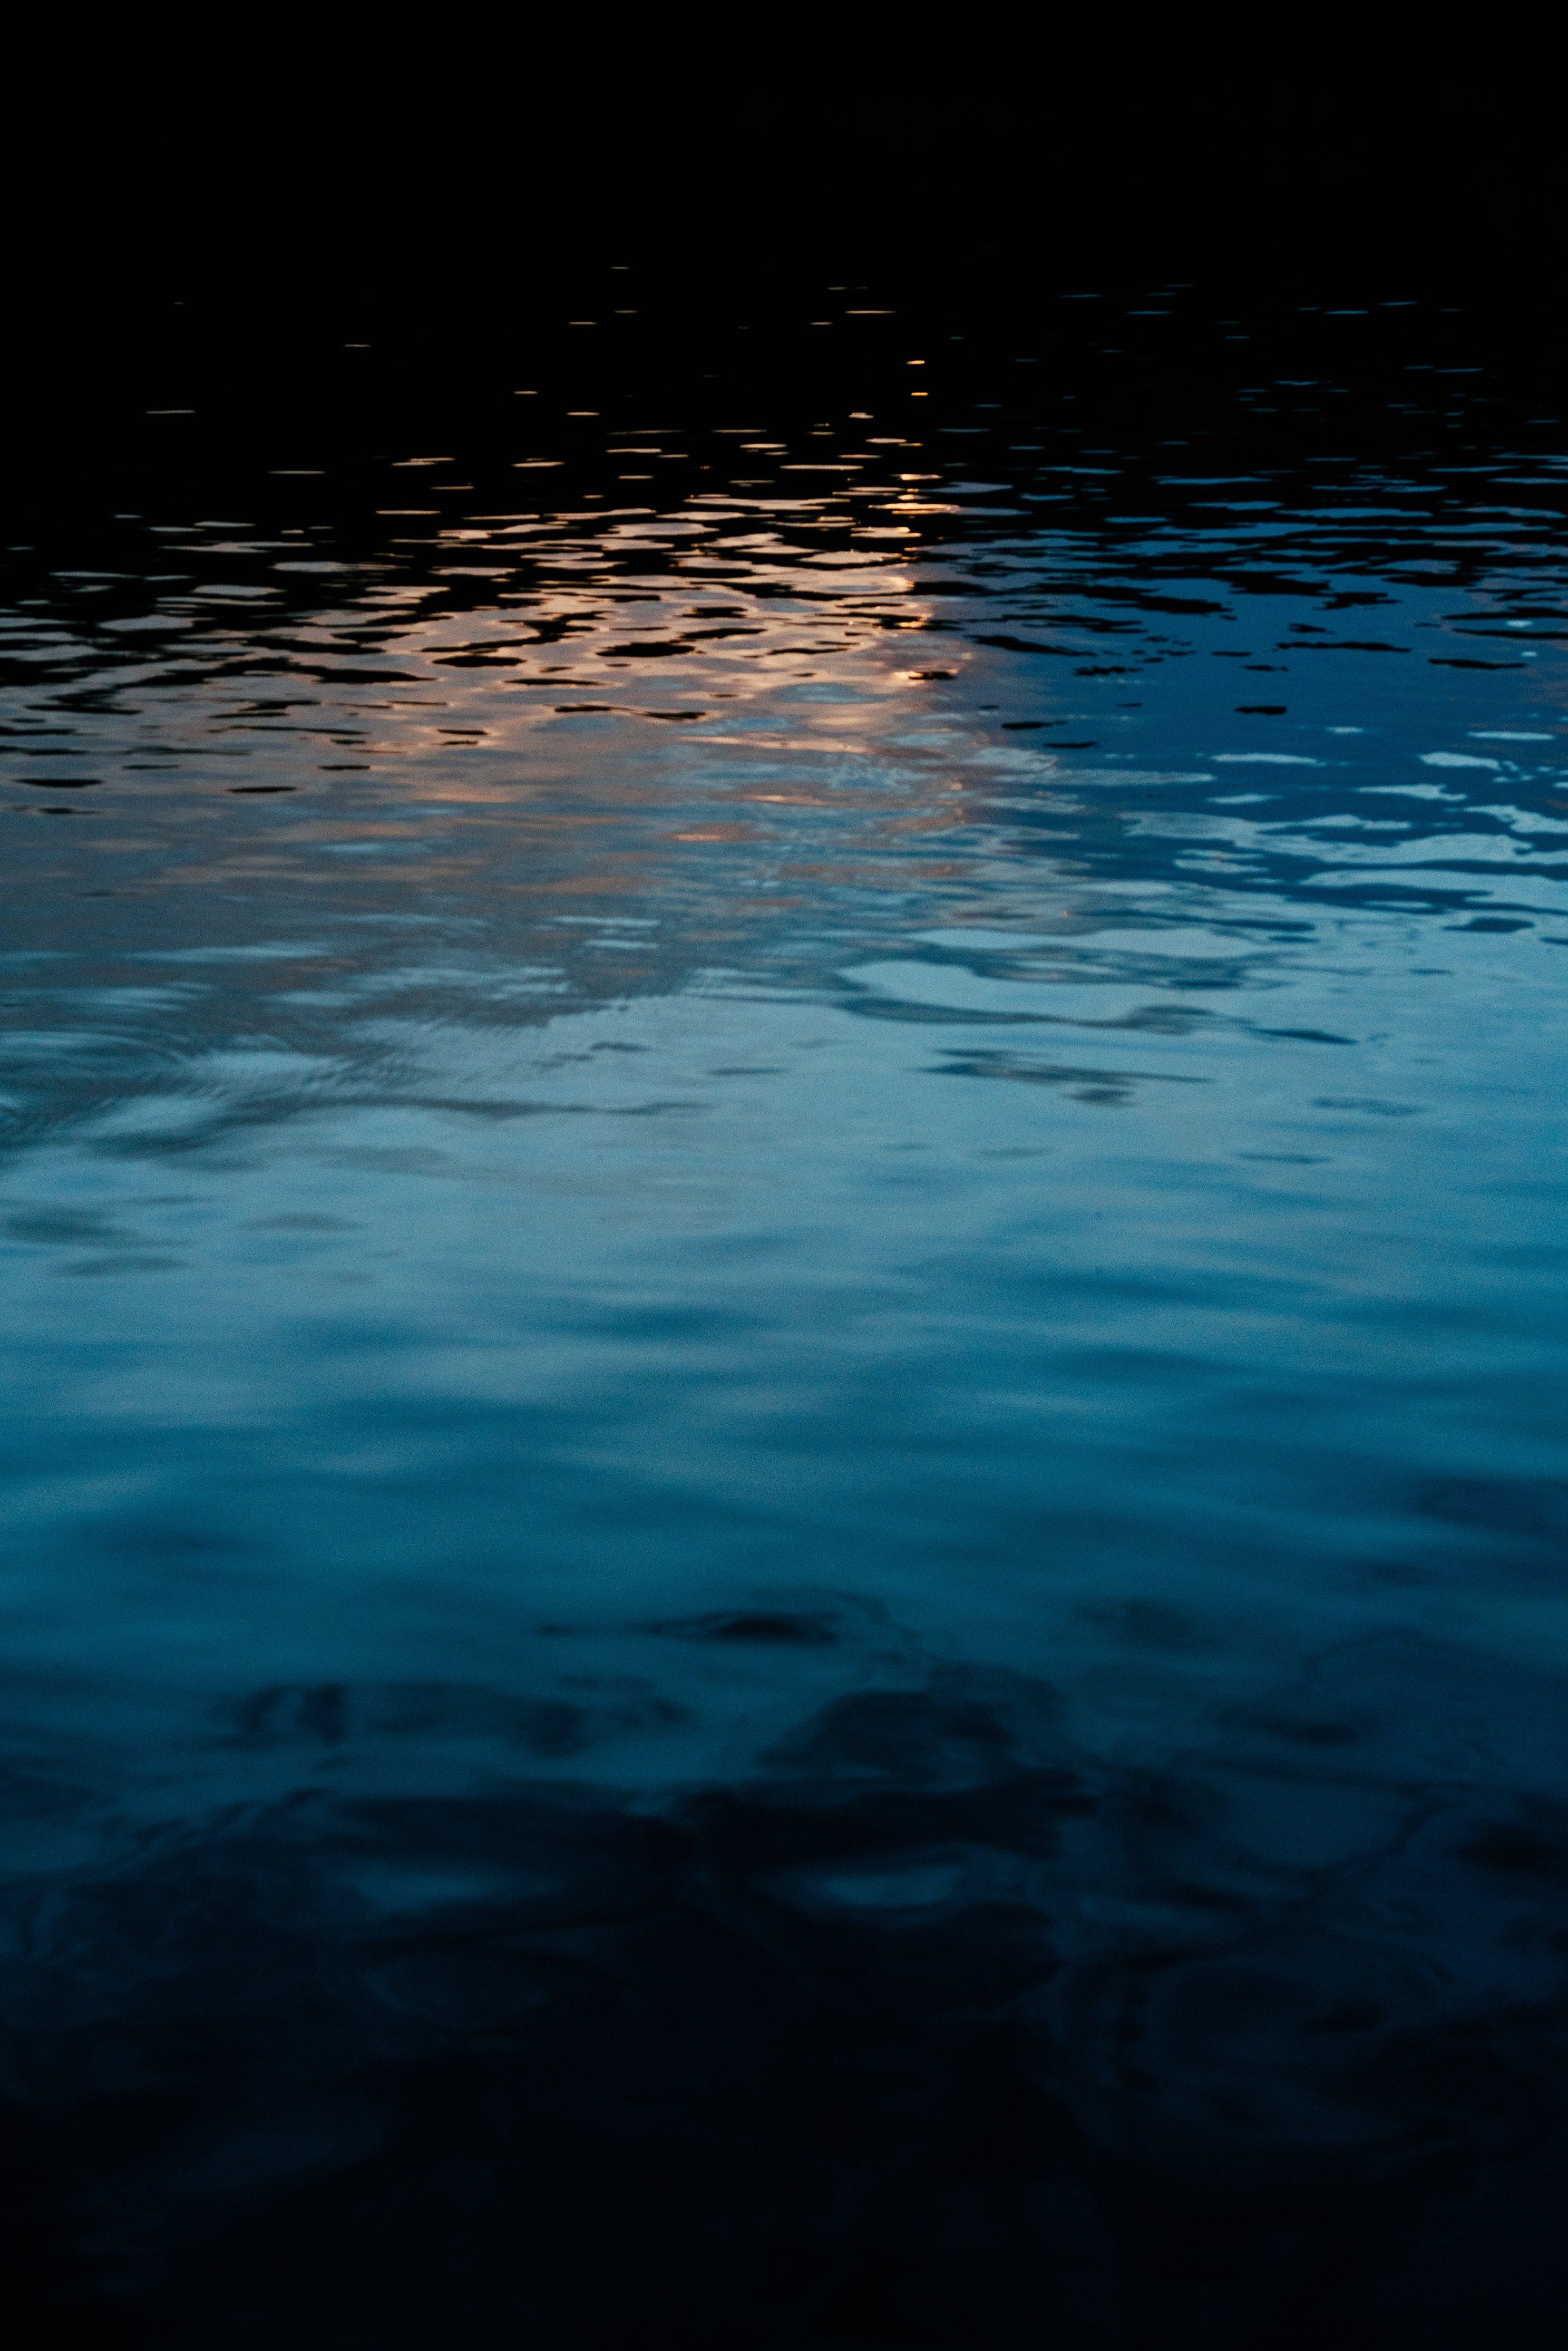 A reflection of the moon in the water at night. - Water